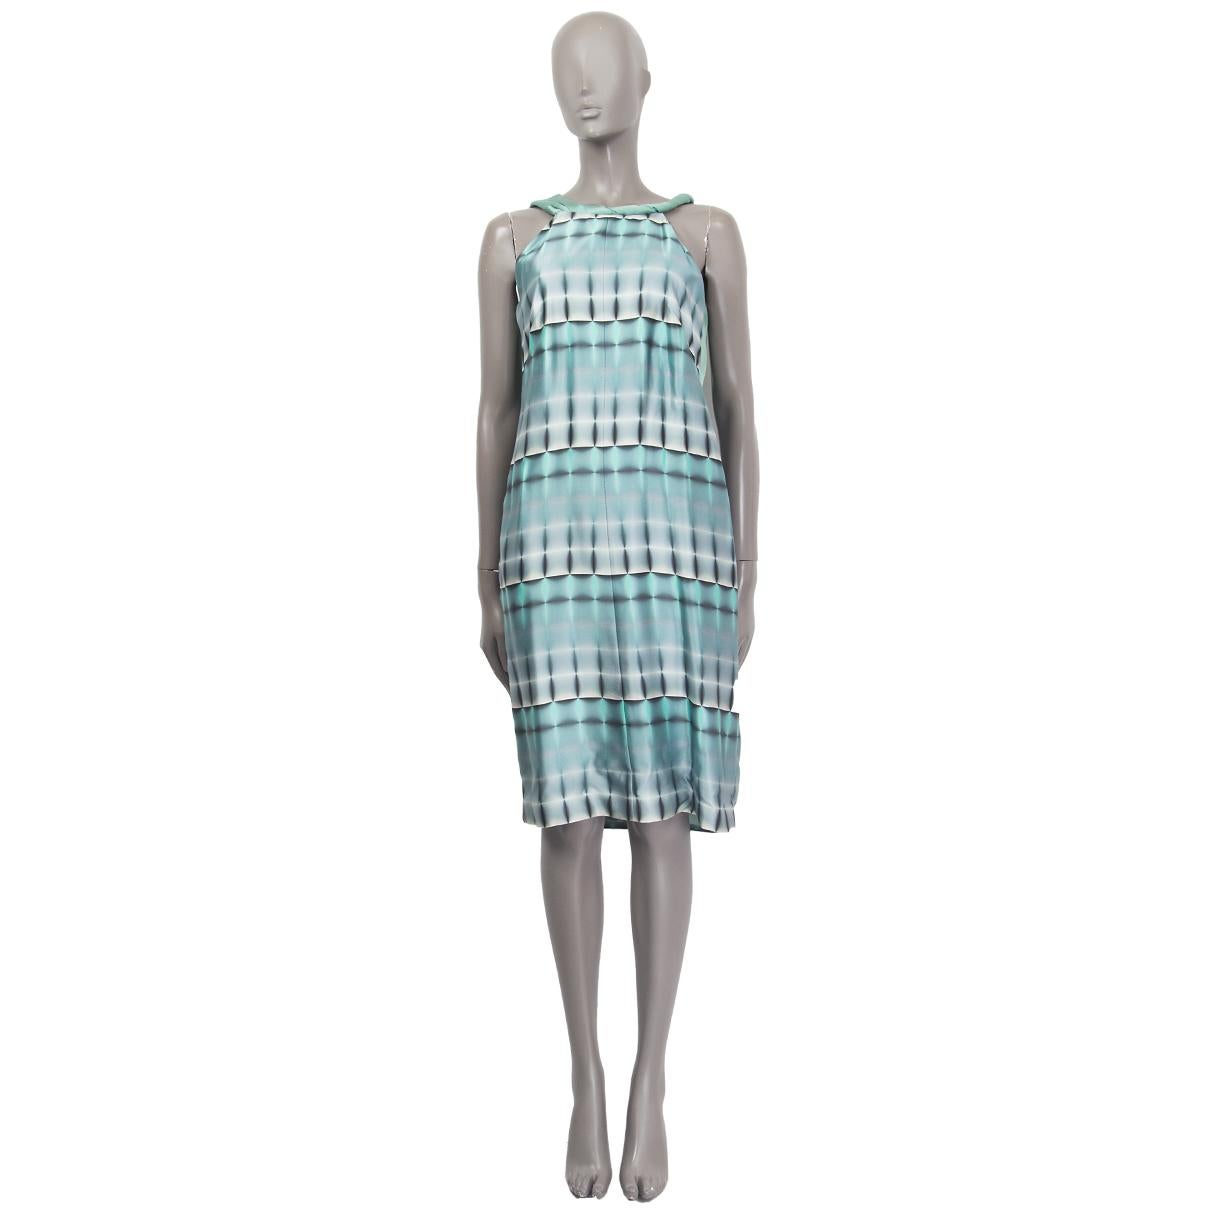 100% authentic Giorgio Armani sleeveless shift dress in tie-dye greyish blue and mint green satin (content tag has been removed - feels like silk) with twisted neckline. Opens with a zipper on the side. Lined in propably silk. Has been worn and is